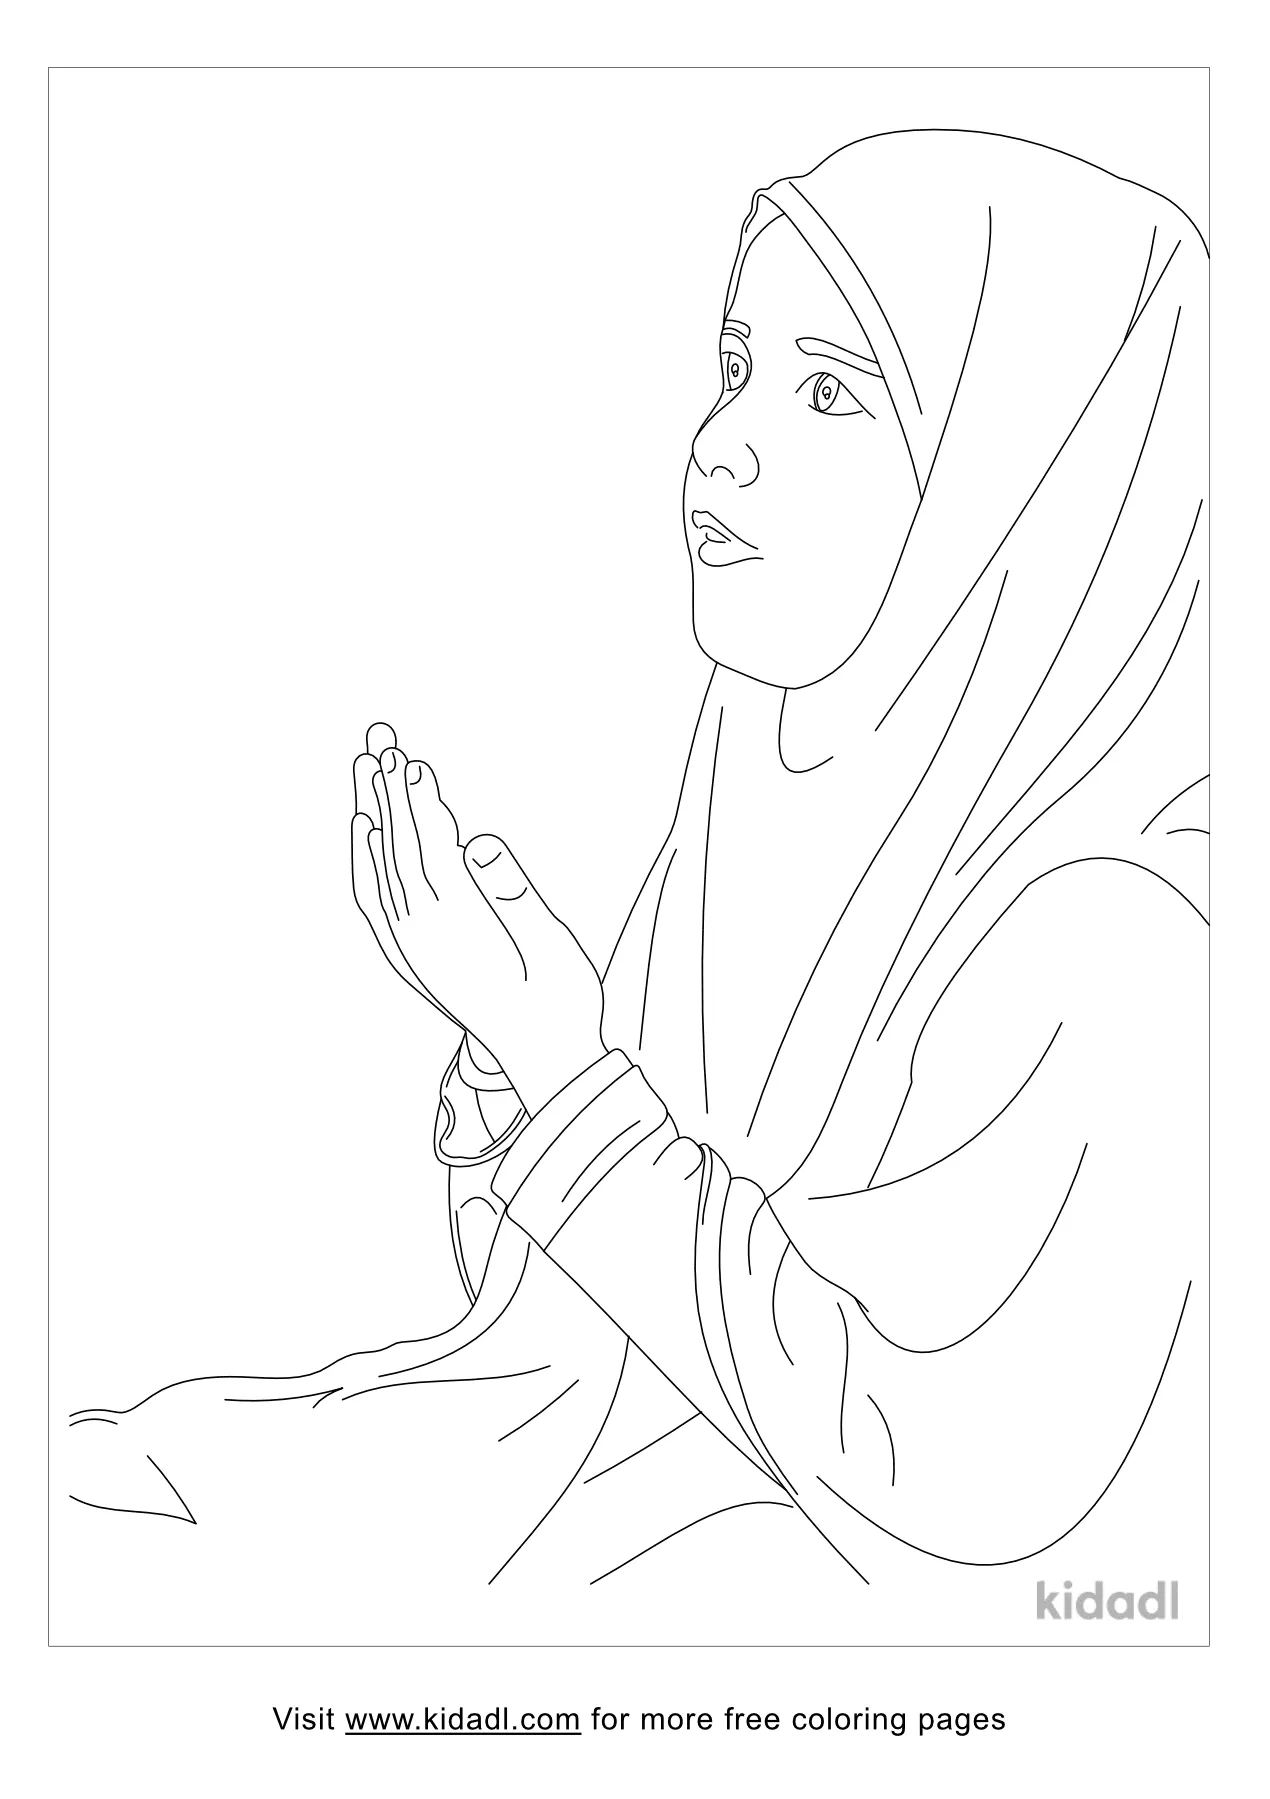 Islamic Coloring Page   Free World geography and flags Coloring ...